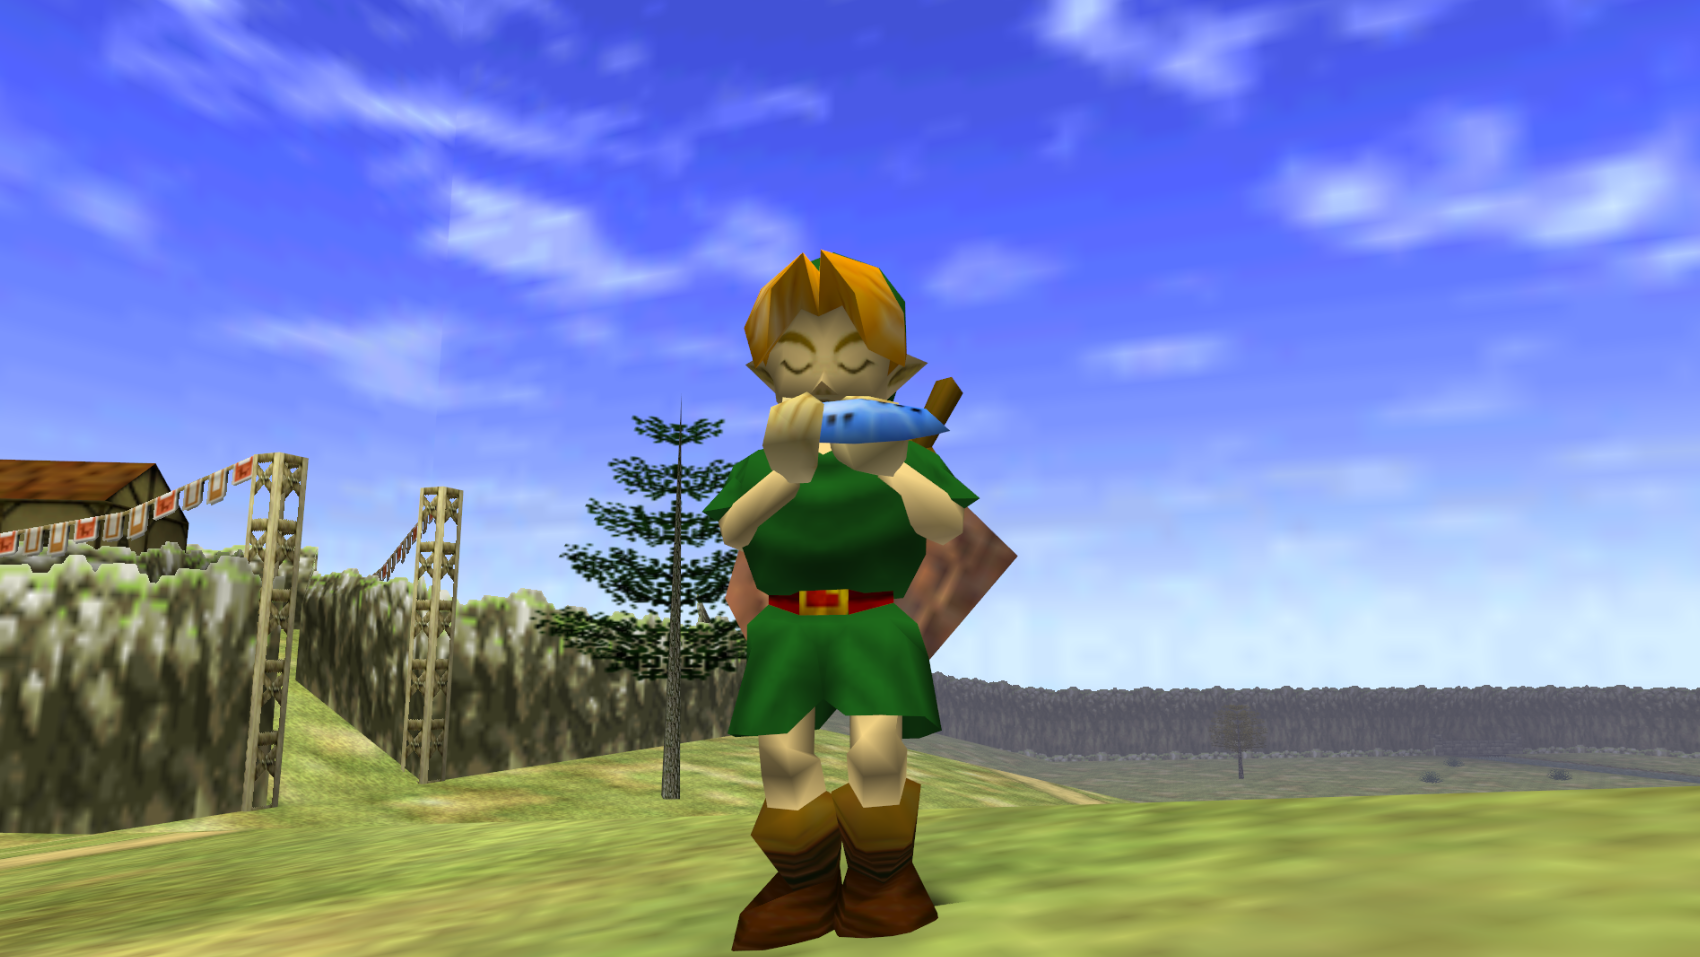 The Legend of Zelda: Ocarina of Time - The Cutting Room Floor